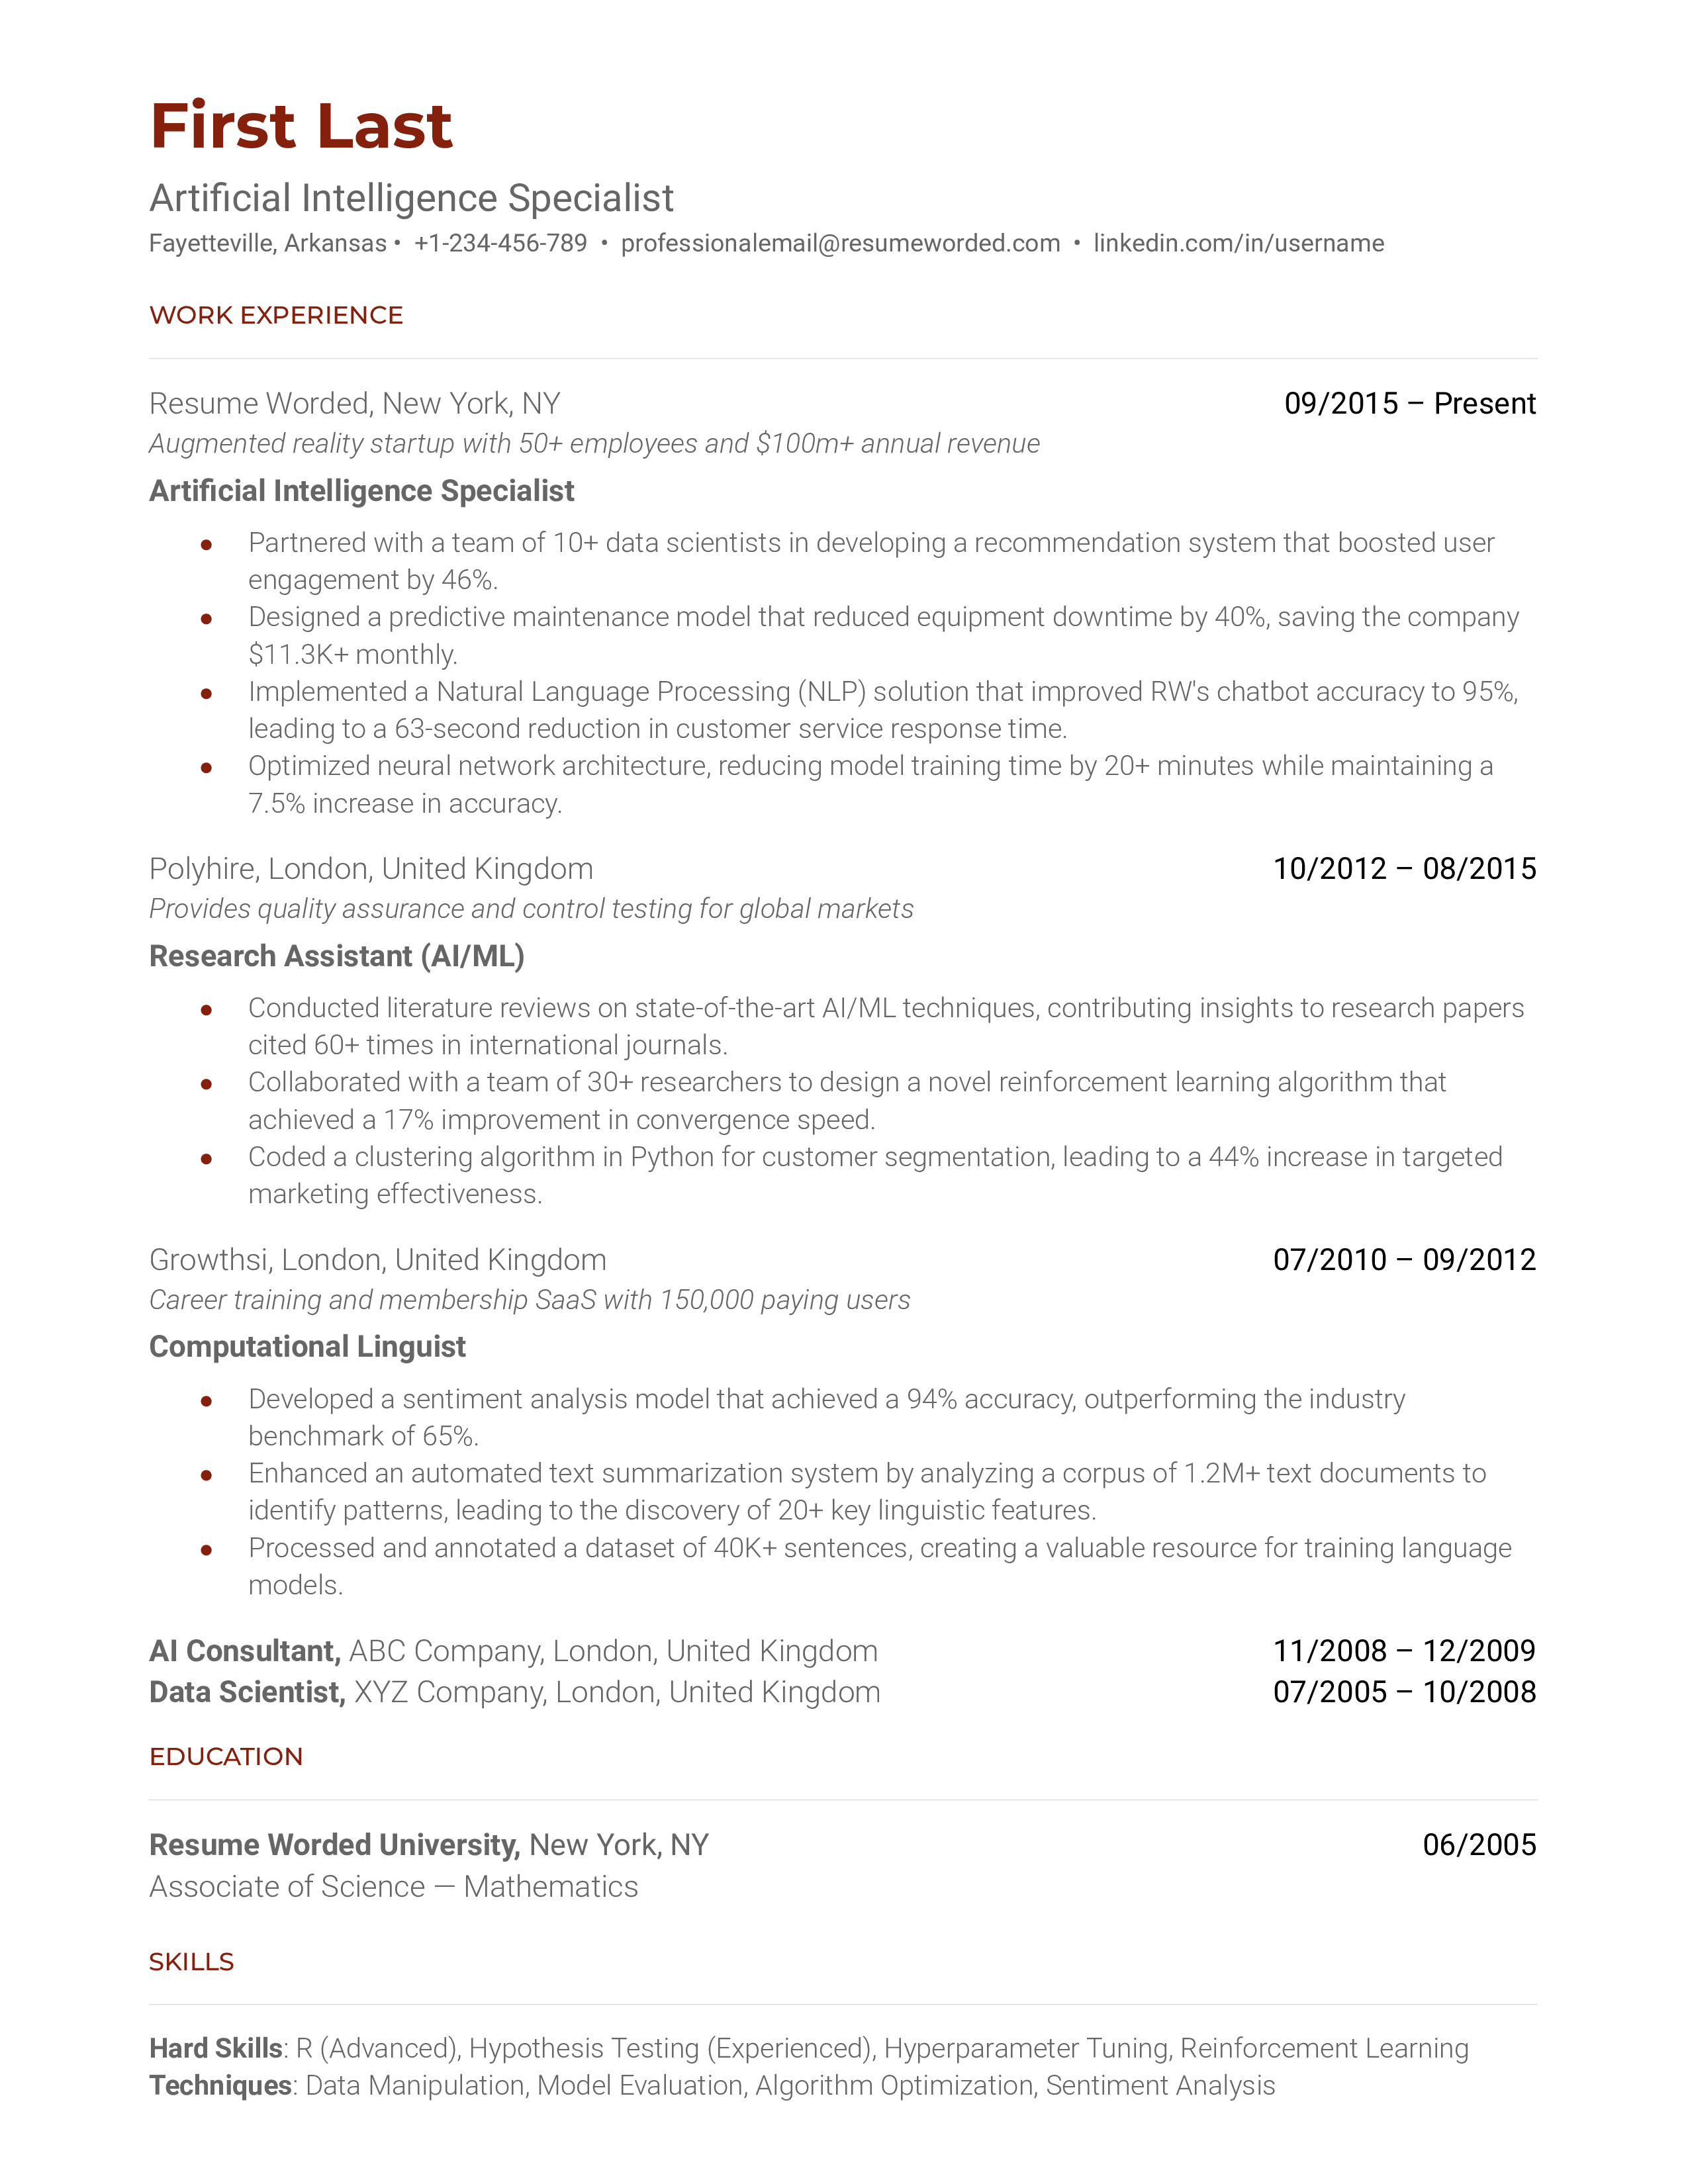 AI Specialist's resume showcasing proficiency in AI-related programming languages, tools, and grasp of AI trends and ethics.